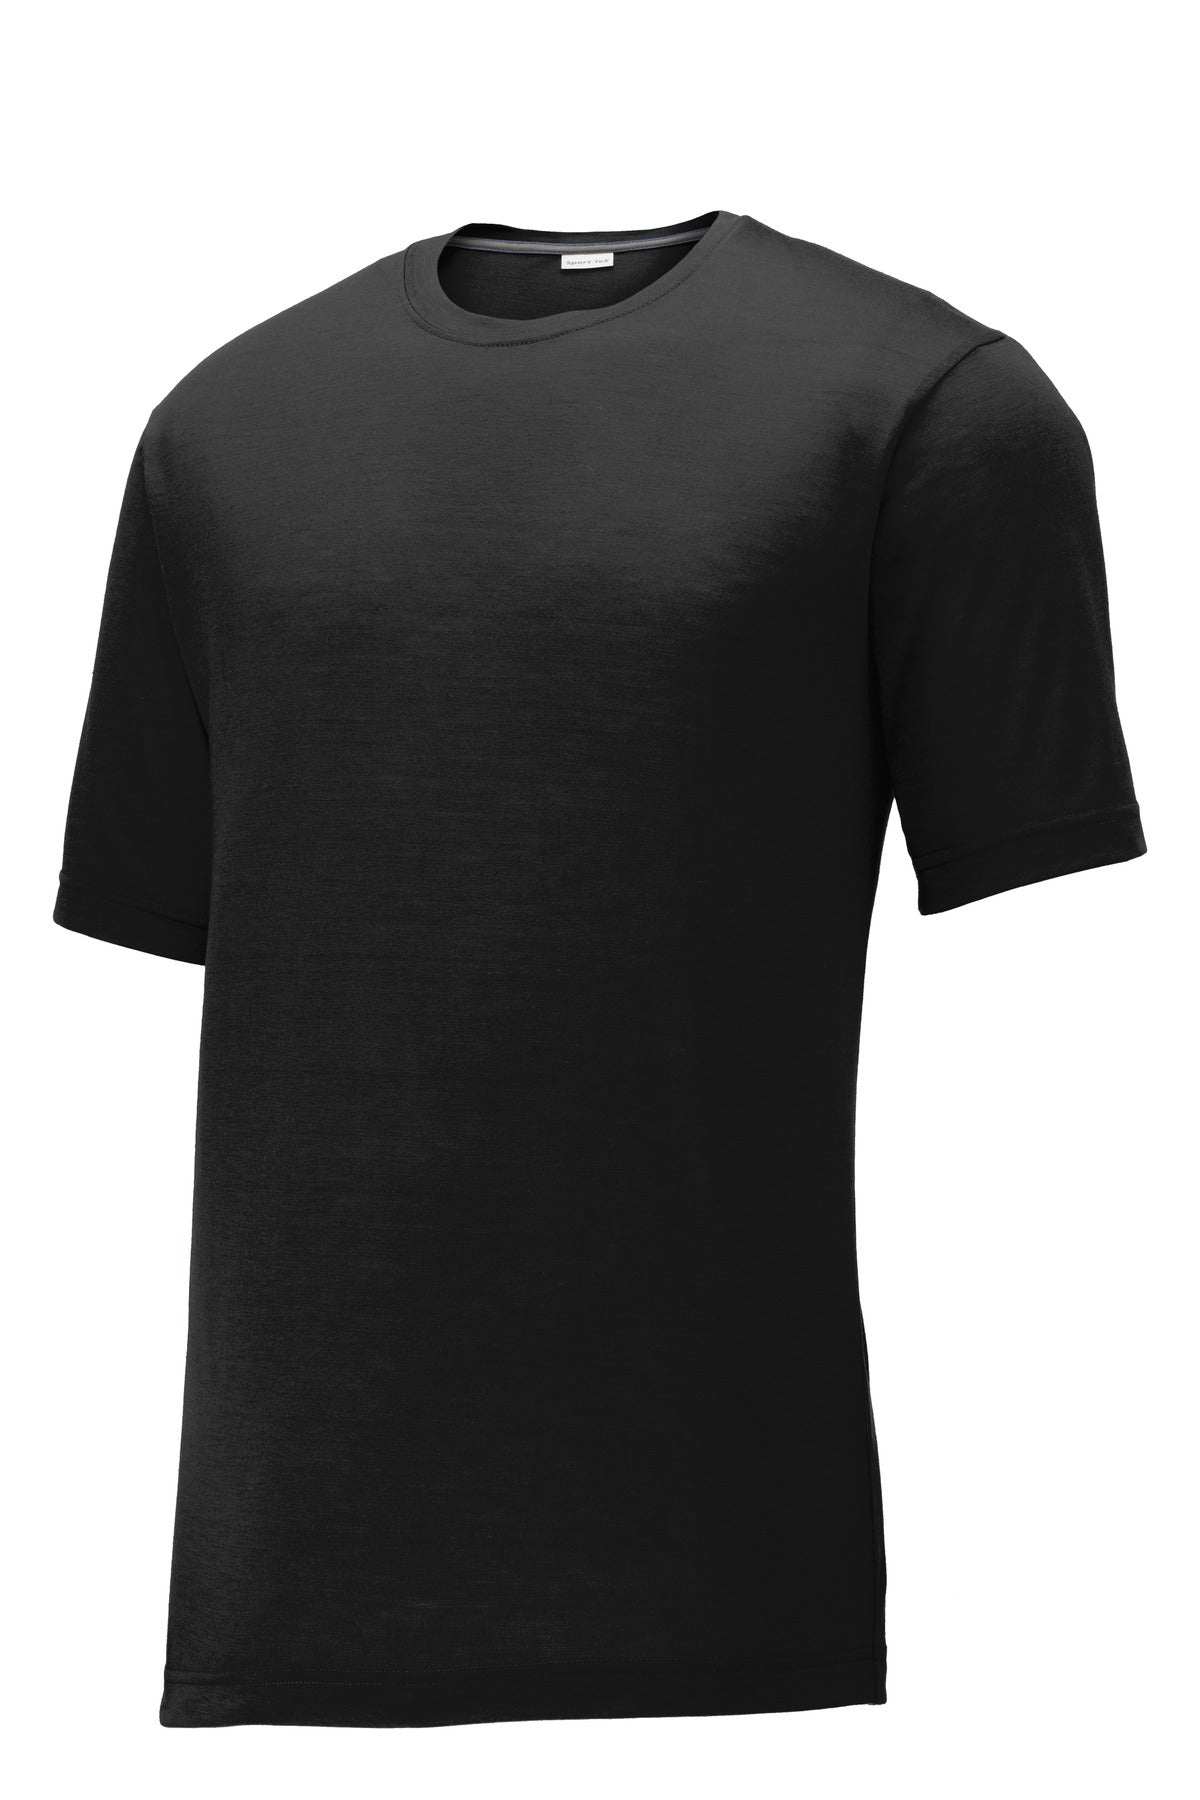 Sport-Tek PosiCharge Competitor™ Cotton Touch™ Tee. ST450